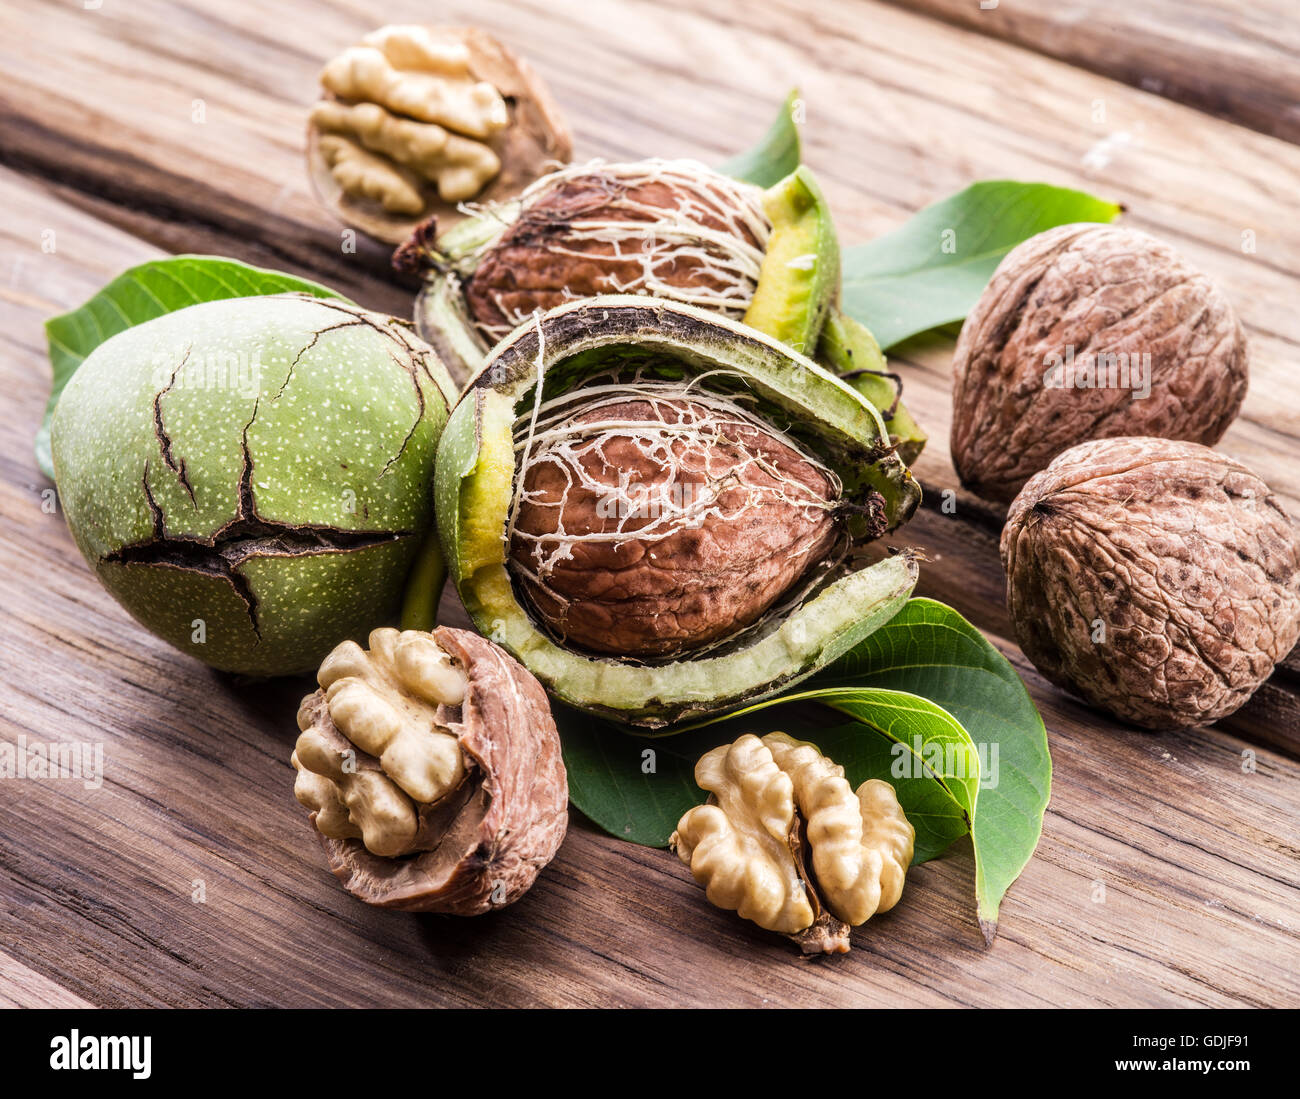 Walnut and walnut kernel on the wooden table. Stock Photo